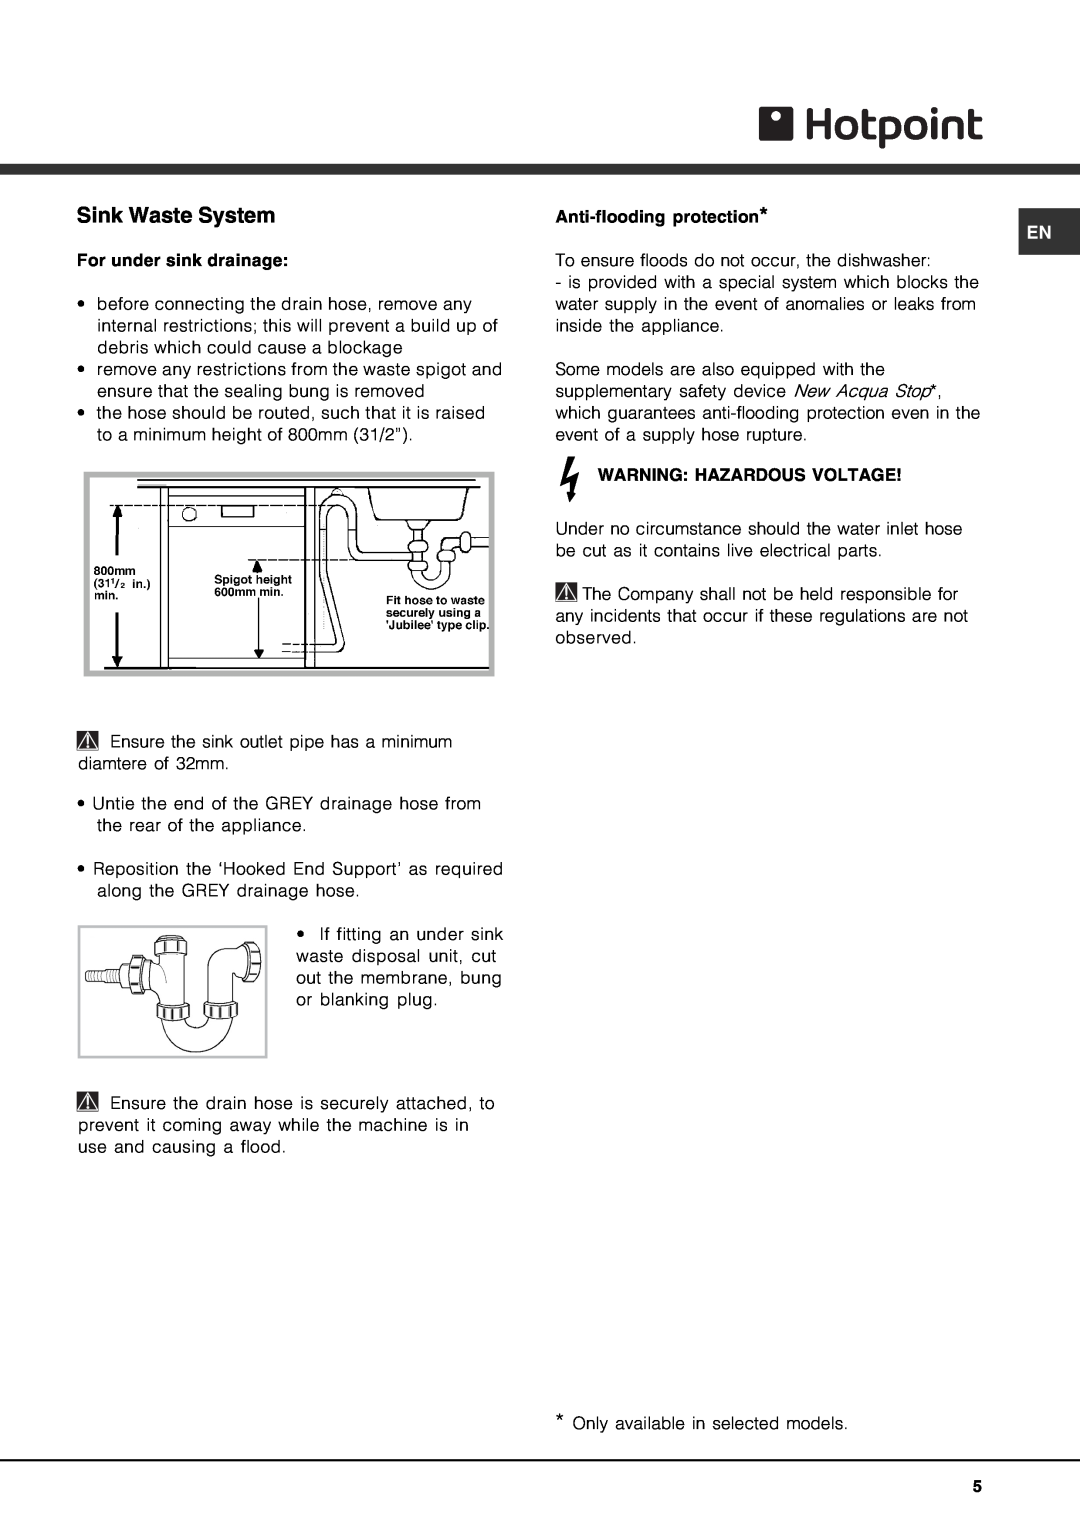 Hotpoint FDF 784 manual Sink Waste System 